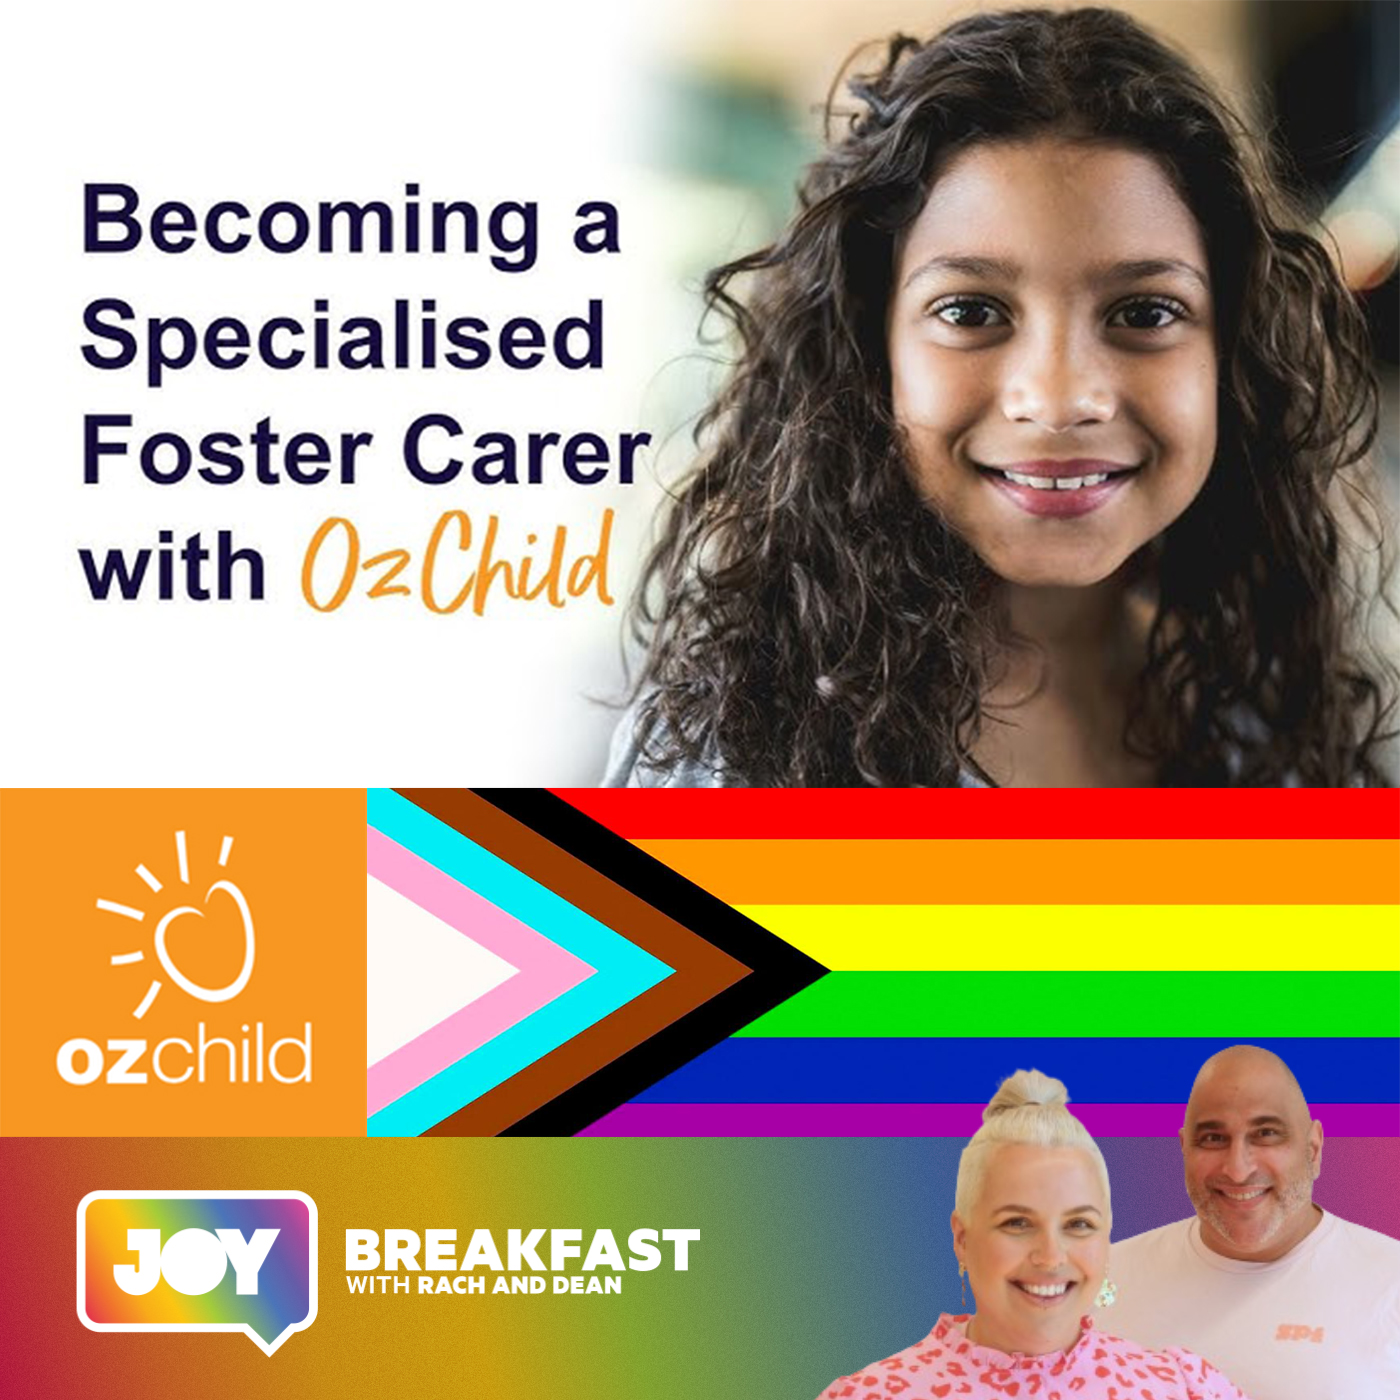 Becoming a foster carer through OzChild